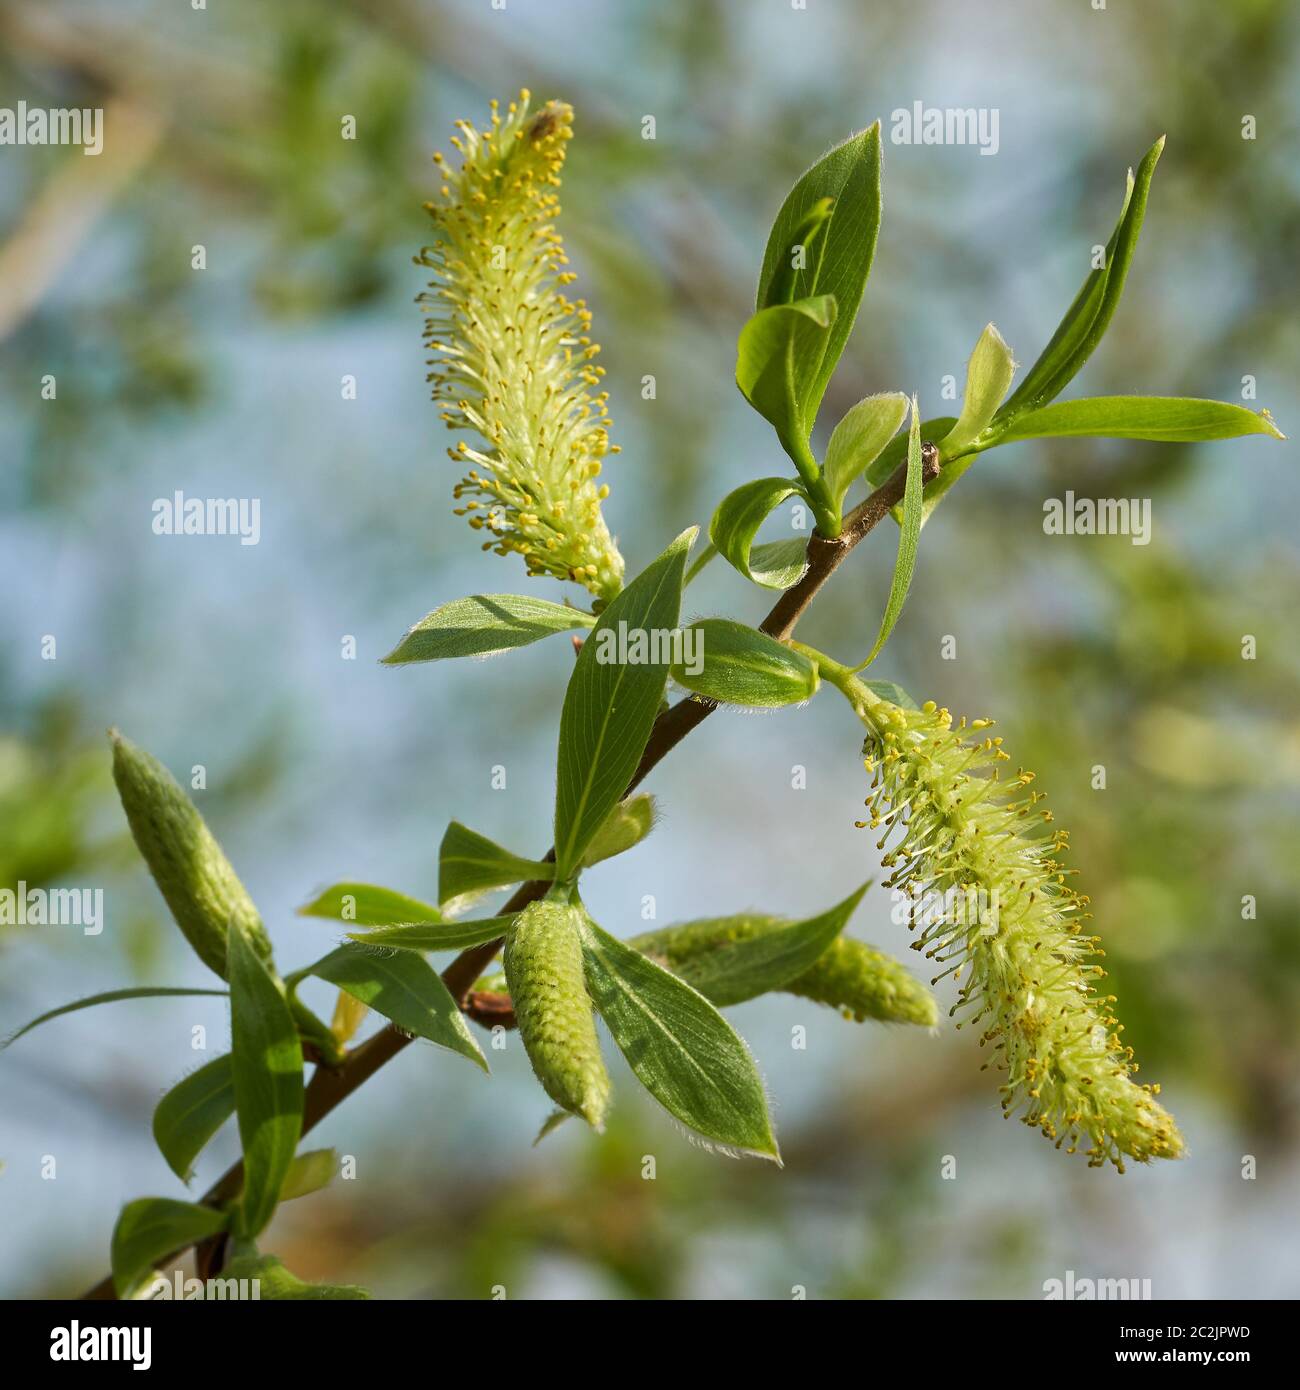 Leaves and inflorescence of a white willow (Salix alba) in spring at a lake Stock Photo